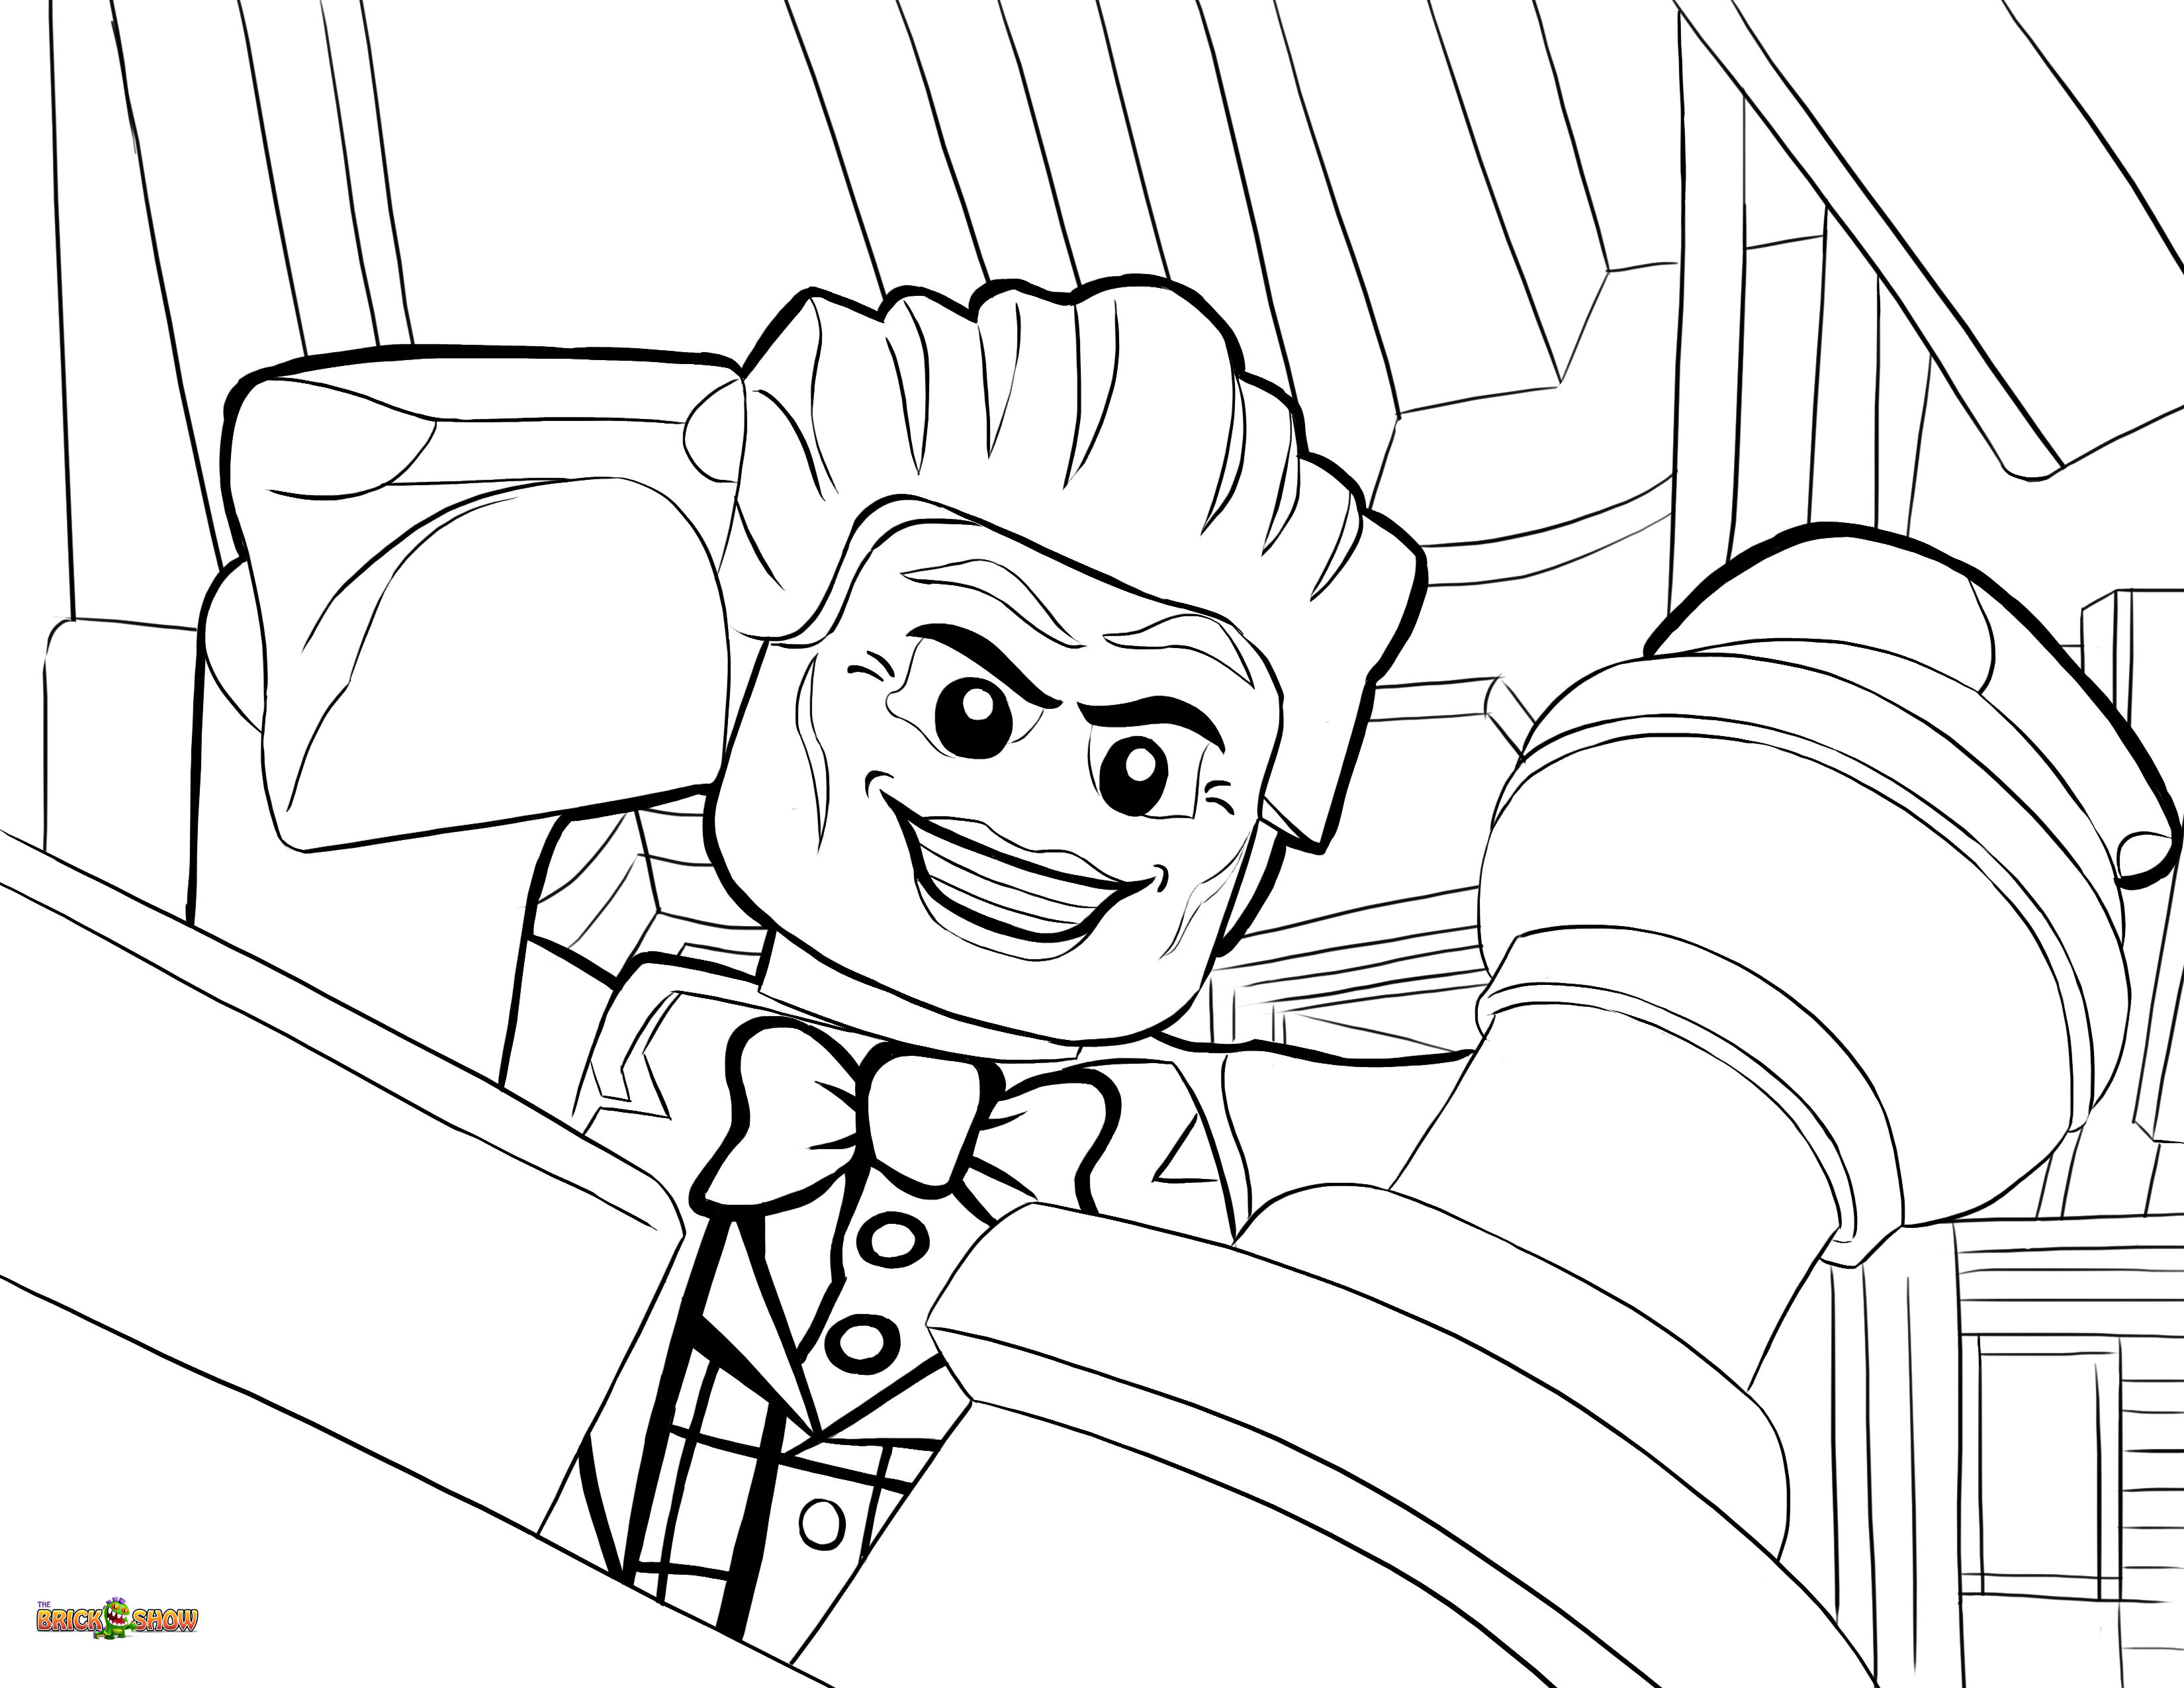 250 Cartoon Coloring Pages For Boys Lego with disney character